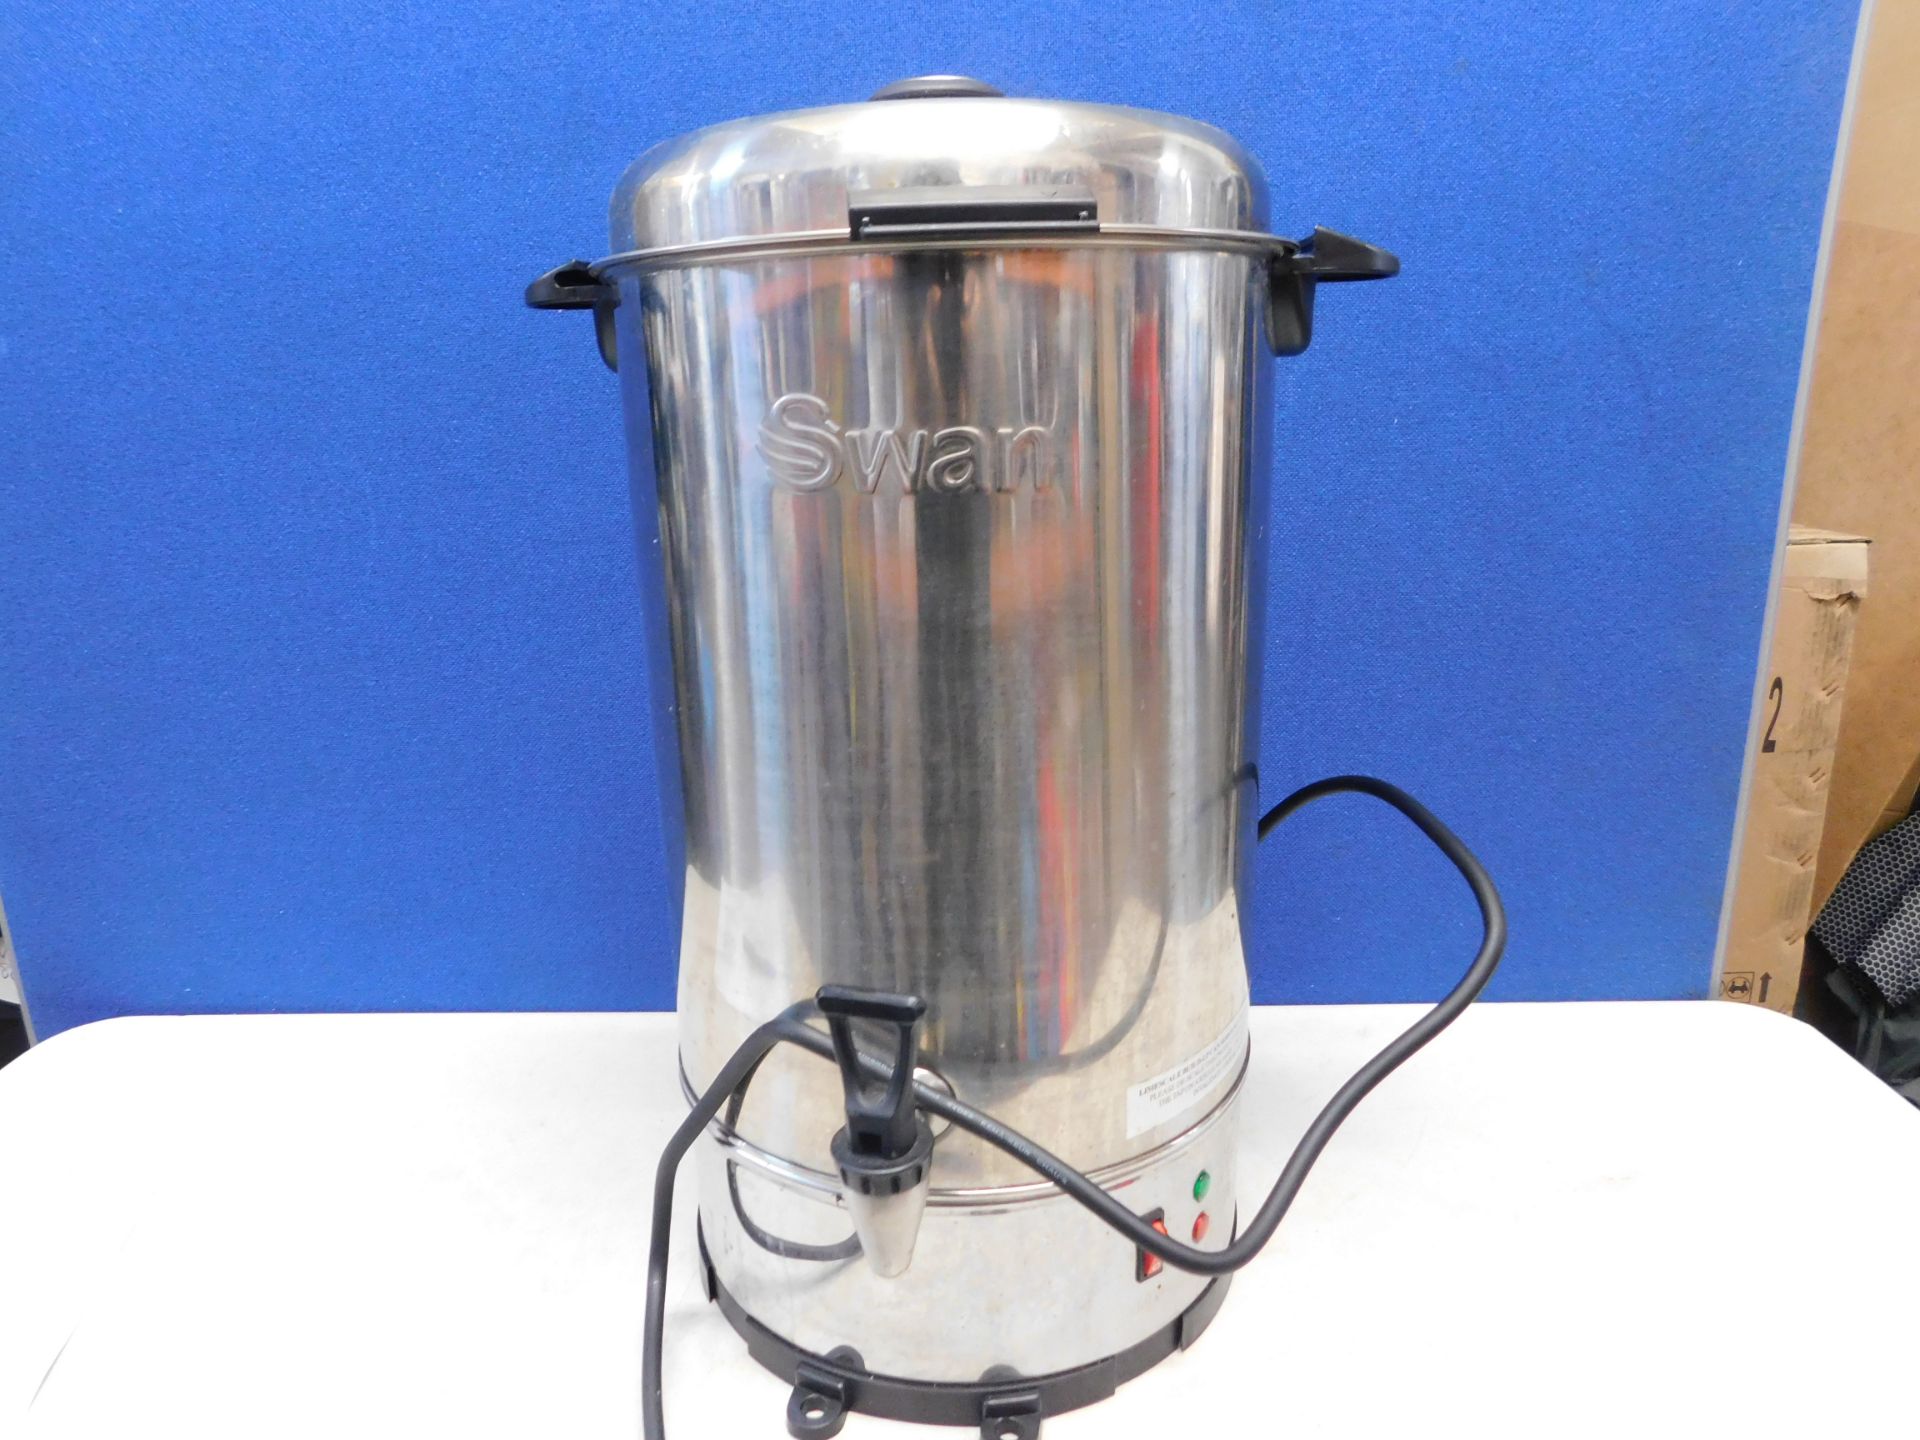 1 SWU20L SWAN 2.2KW 20L CATERING URN WITH 80 CUP CAPACITY RRP Â£119